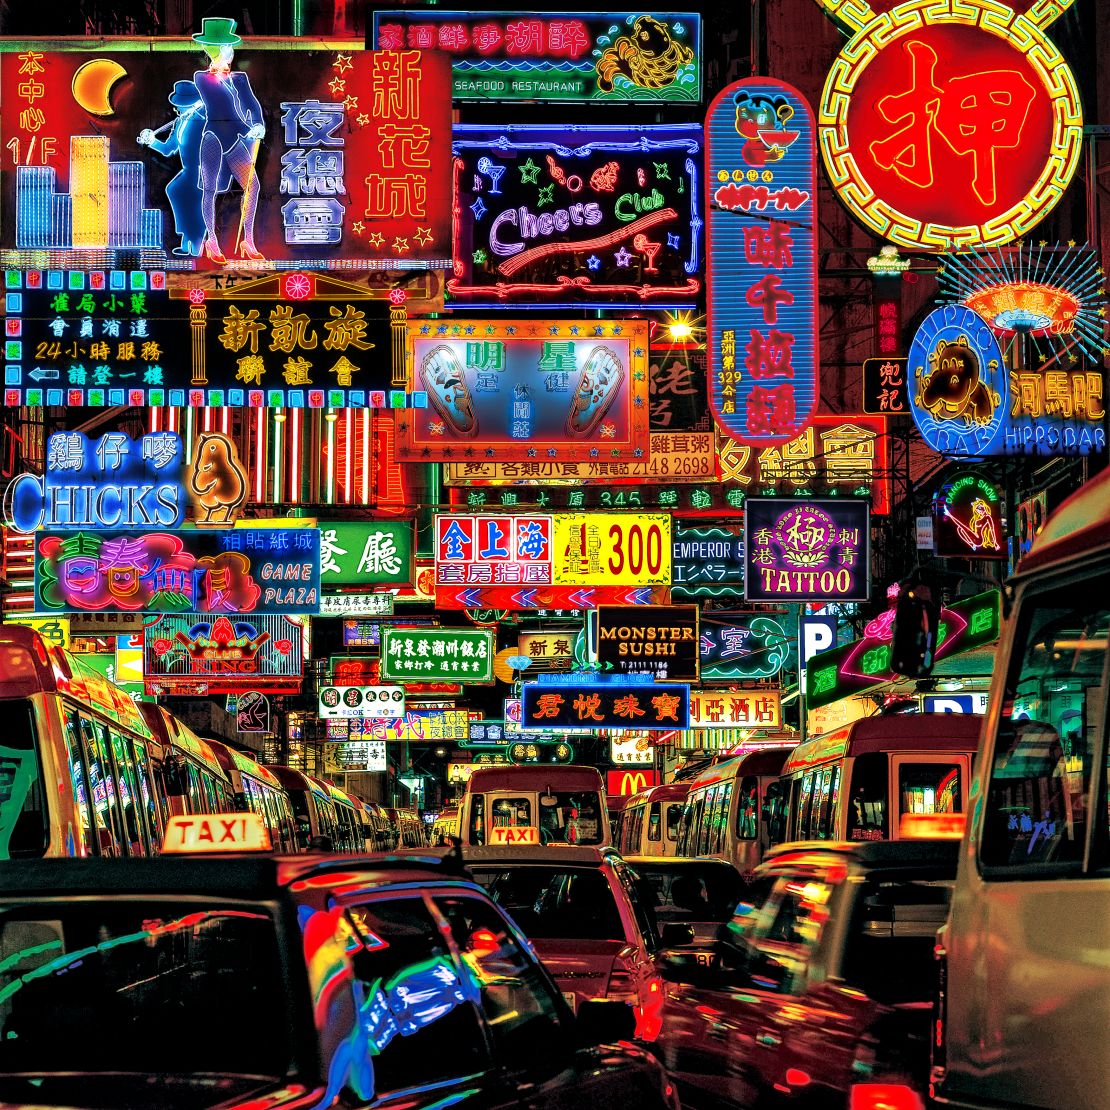 Macgregor's "Neon Fantasy" series sees him compiling photos of Hong Kong's increasingly rare neon signs into single collages.